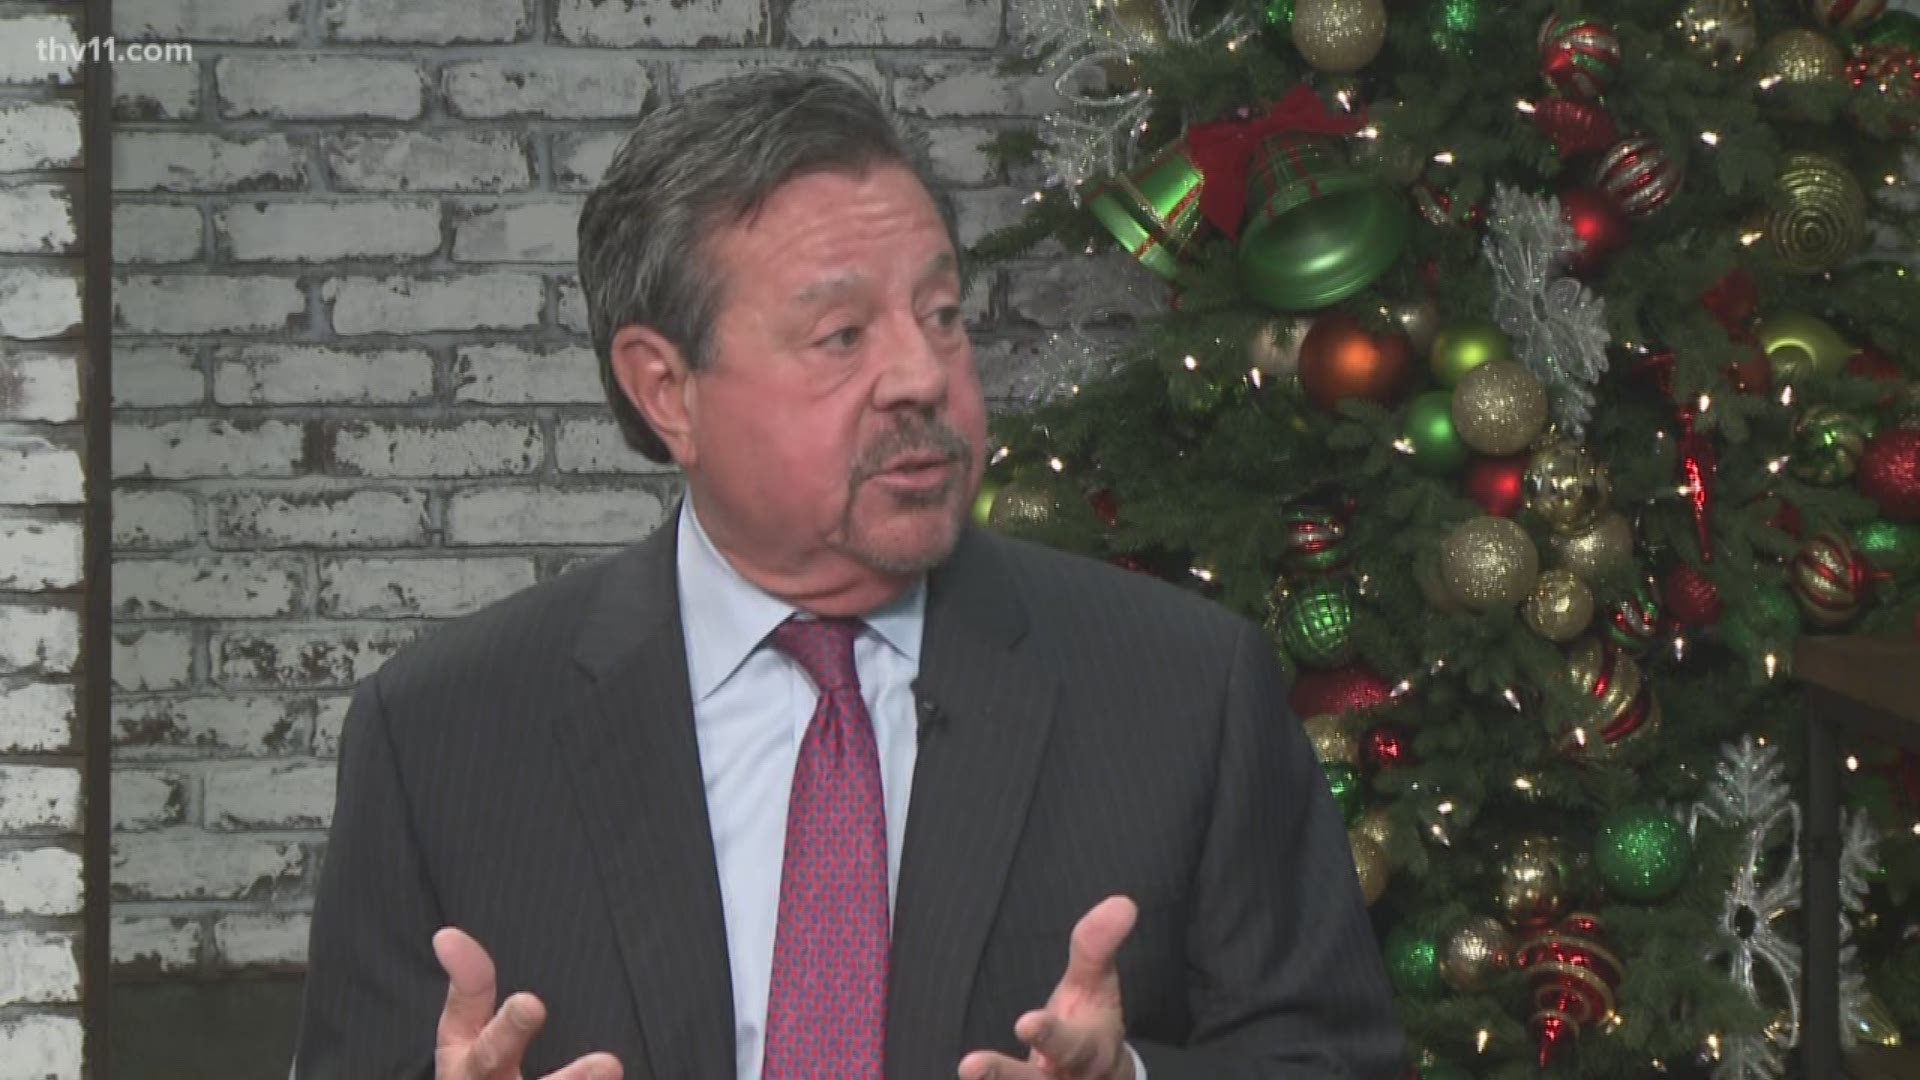 Barry Corkern shares what the new tax law means for filing your taxes next year.